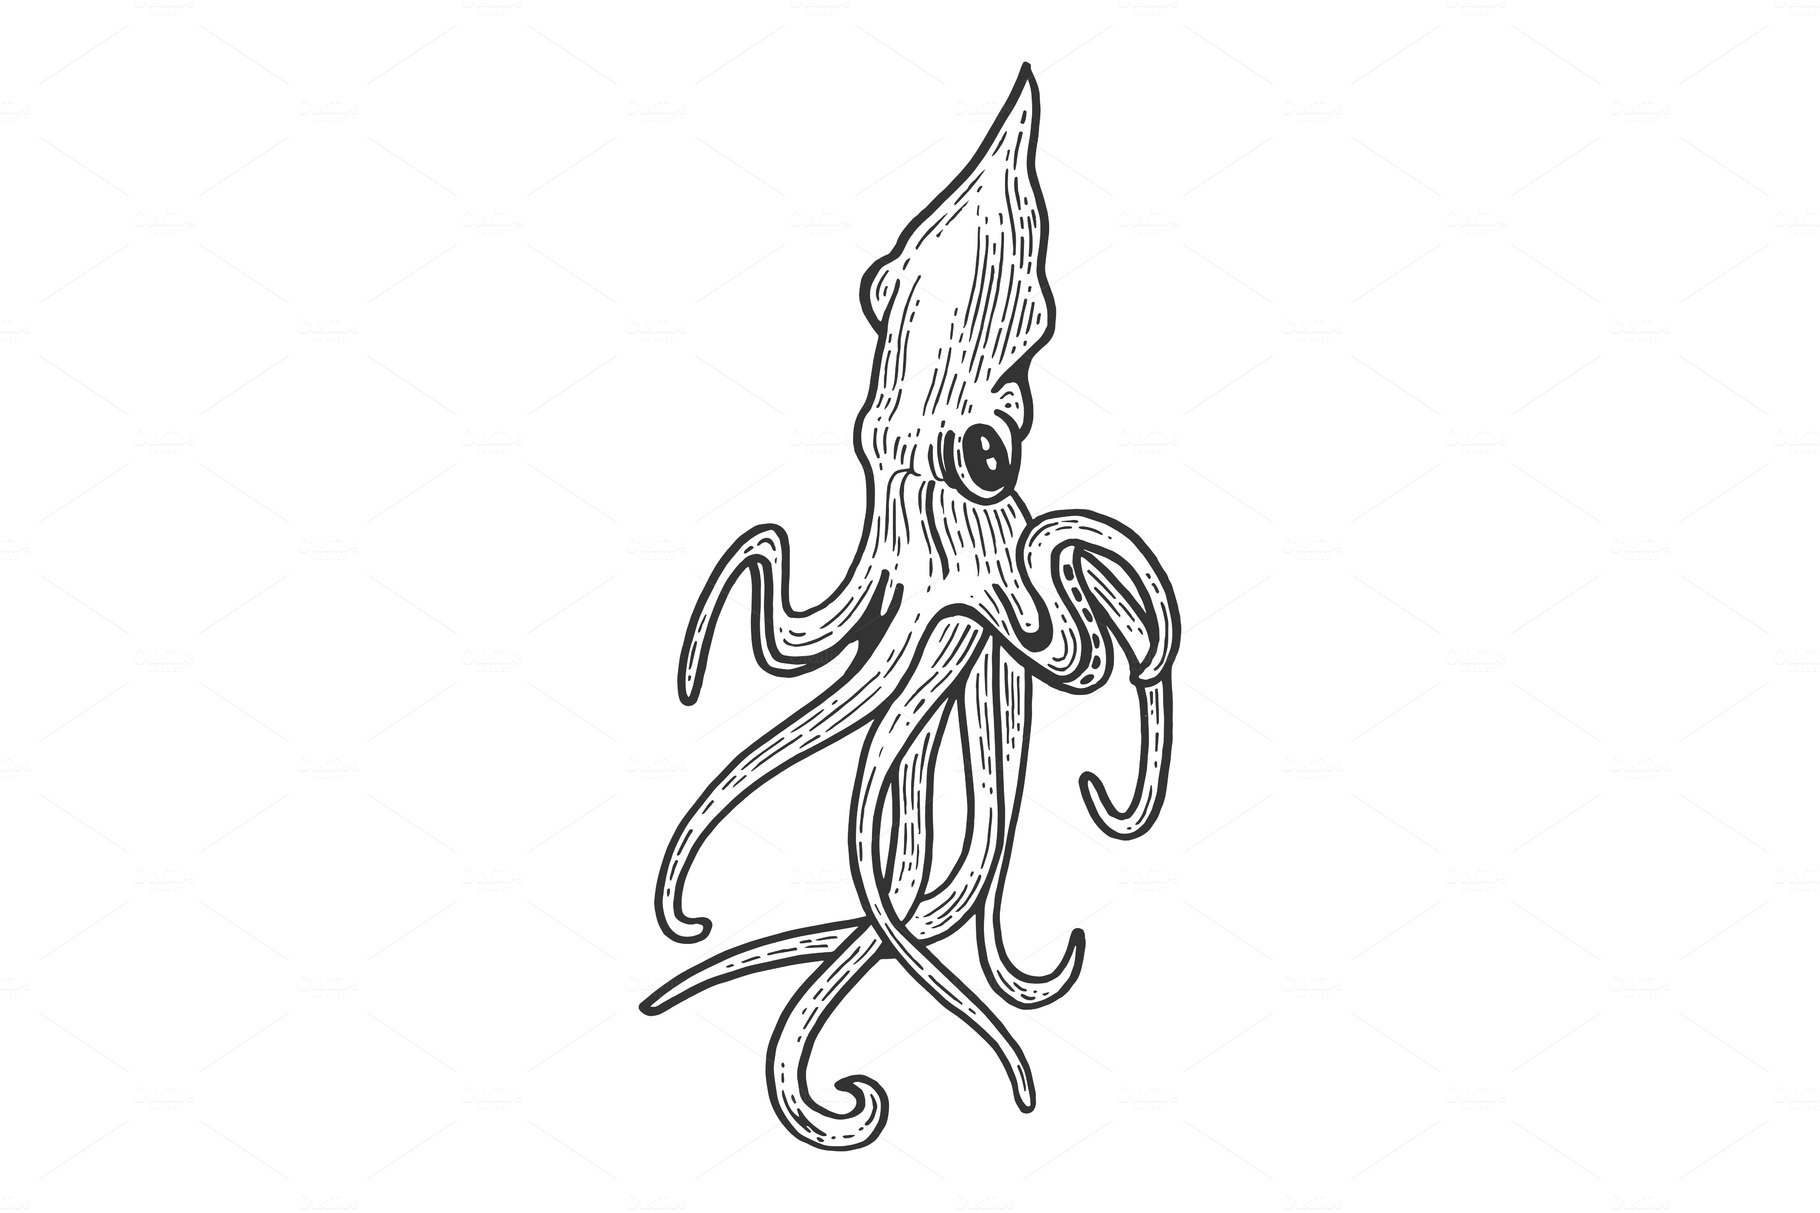 Squid animal sketch engraving vector cover image.